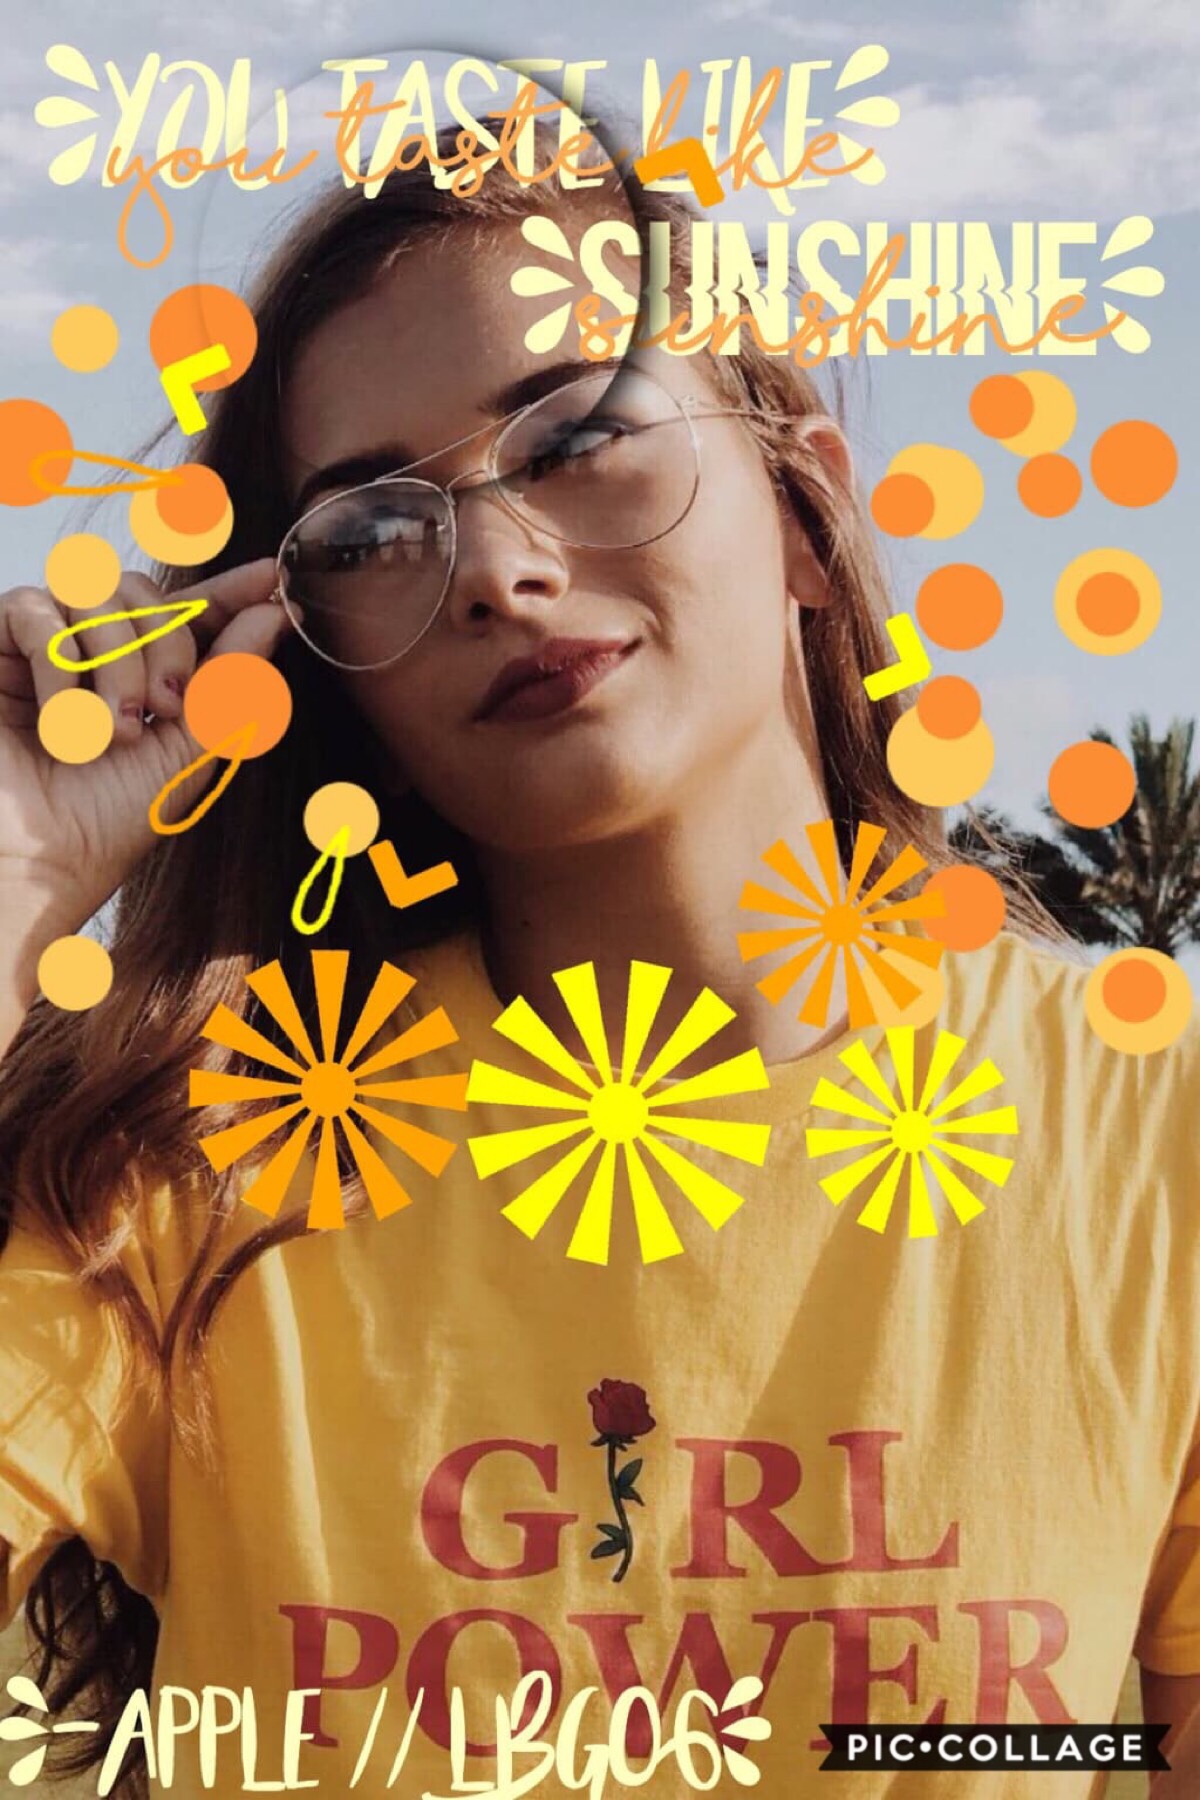 💛Tappp🧡

This is one out of four collabs that I’m doing!! 😂🤦🏼‍♀️

🧡💛💕XOXO💕💛🧡